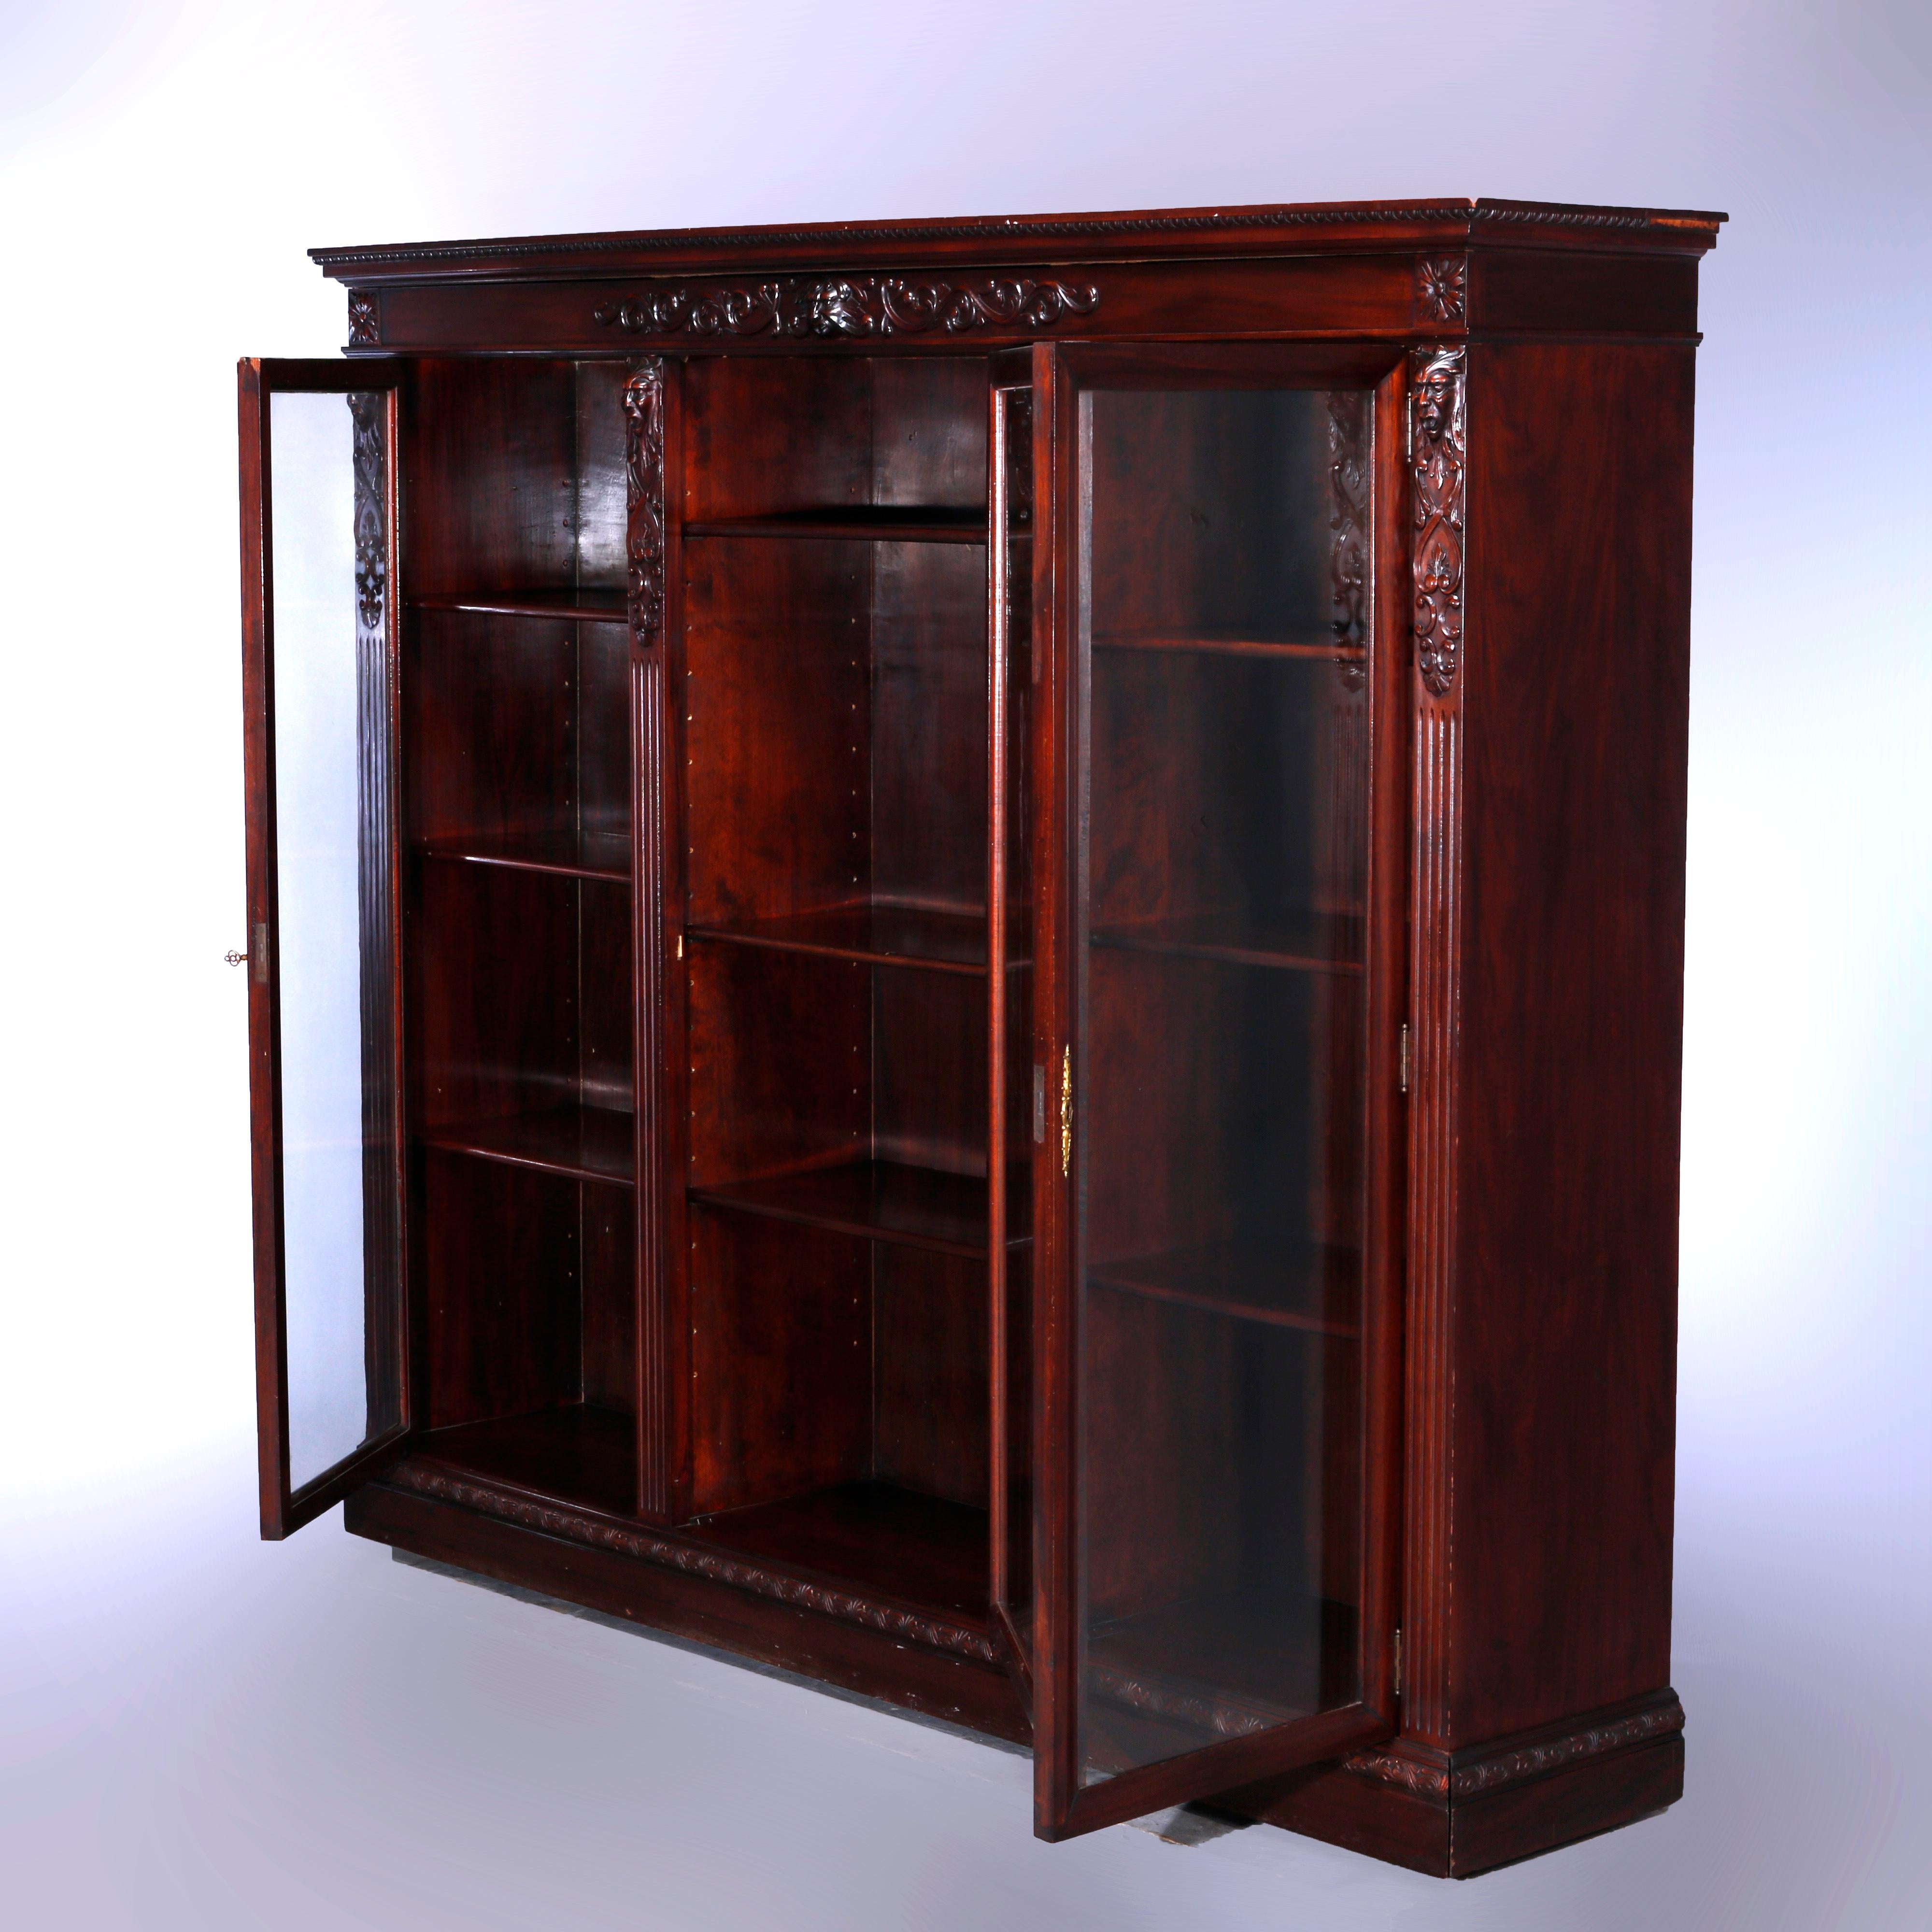 An antique bookcase in the manner of RJ Horner offers mahogany construction with figural carved lion, satyr and foliate elements, triple glass doors opening to shelved and divided interior, c1890

Measures - 63.5'' H x 73.25'' W x 14.75'' D.